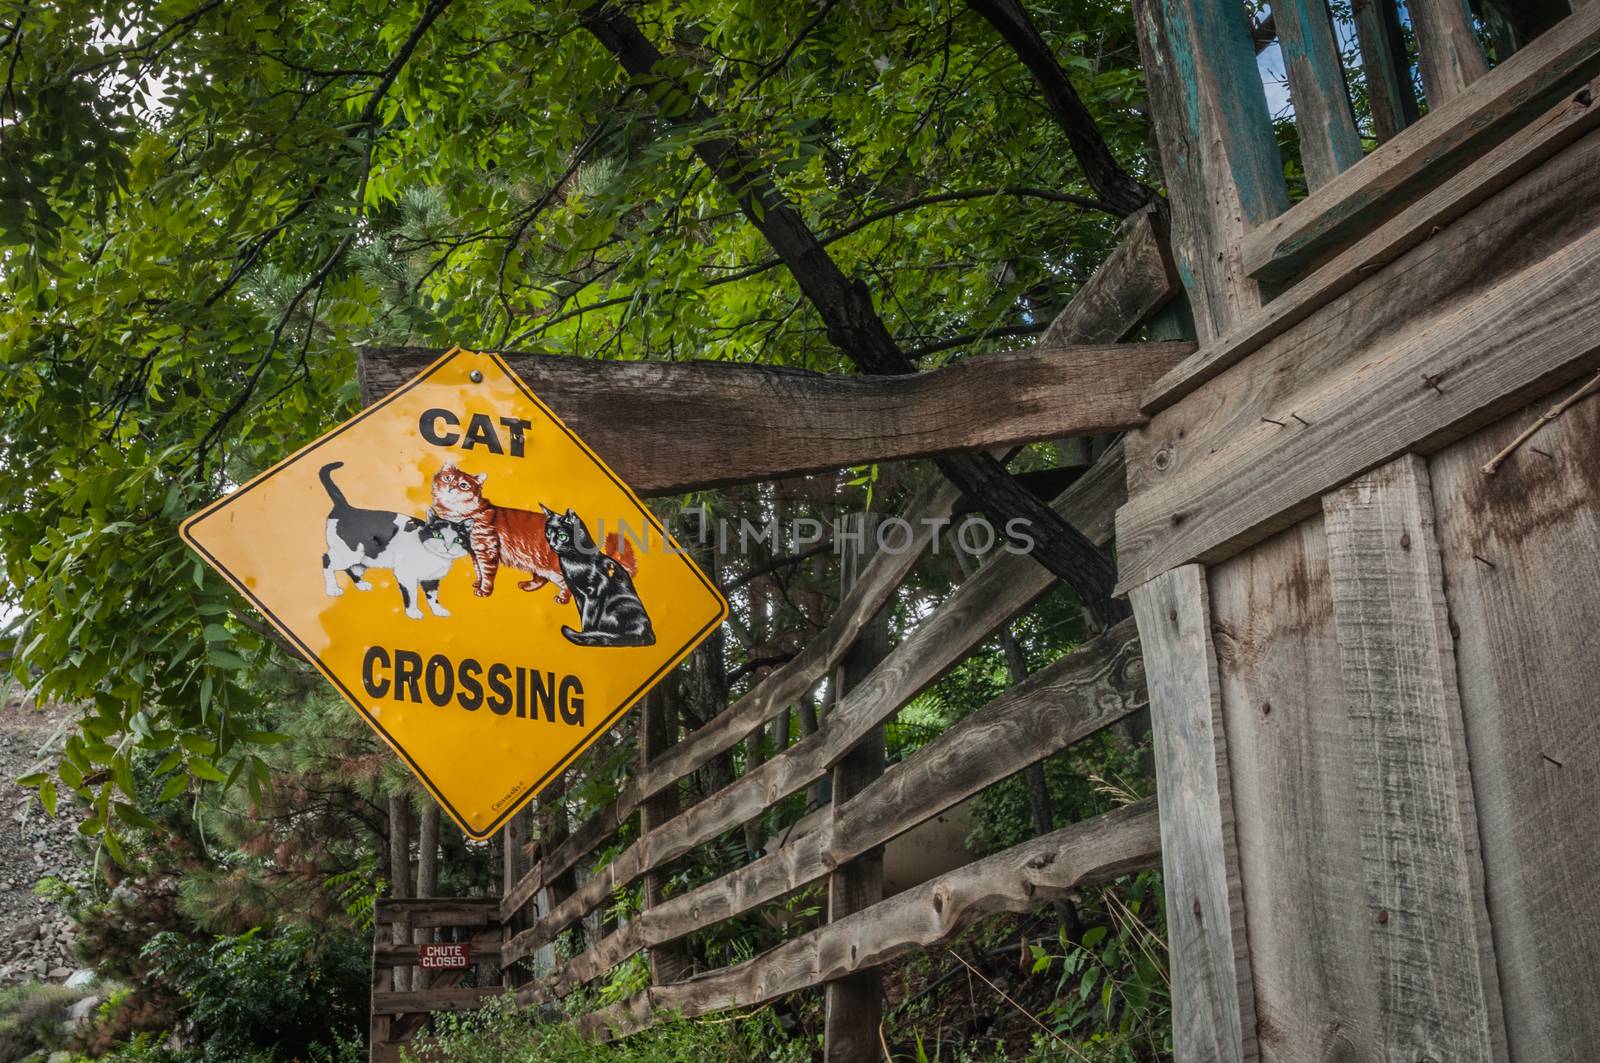 Cat crossing sign in Jerome Arizona Ghost Town by weltreisendertj